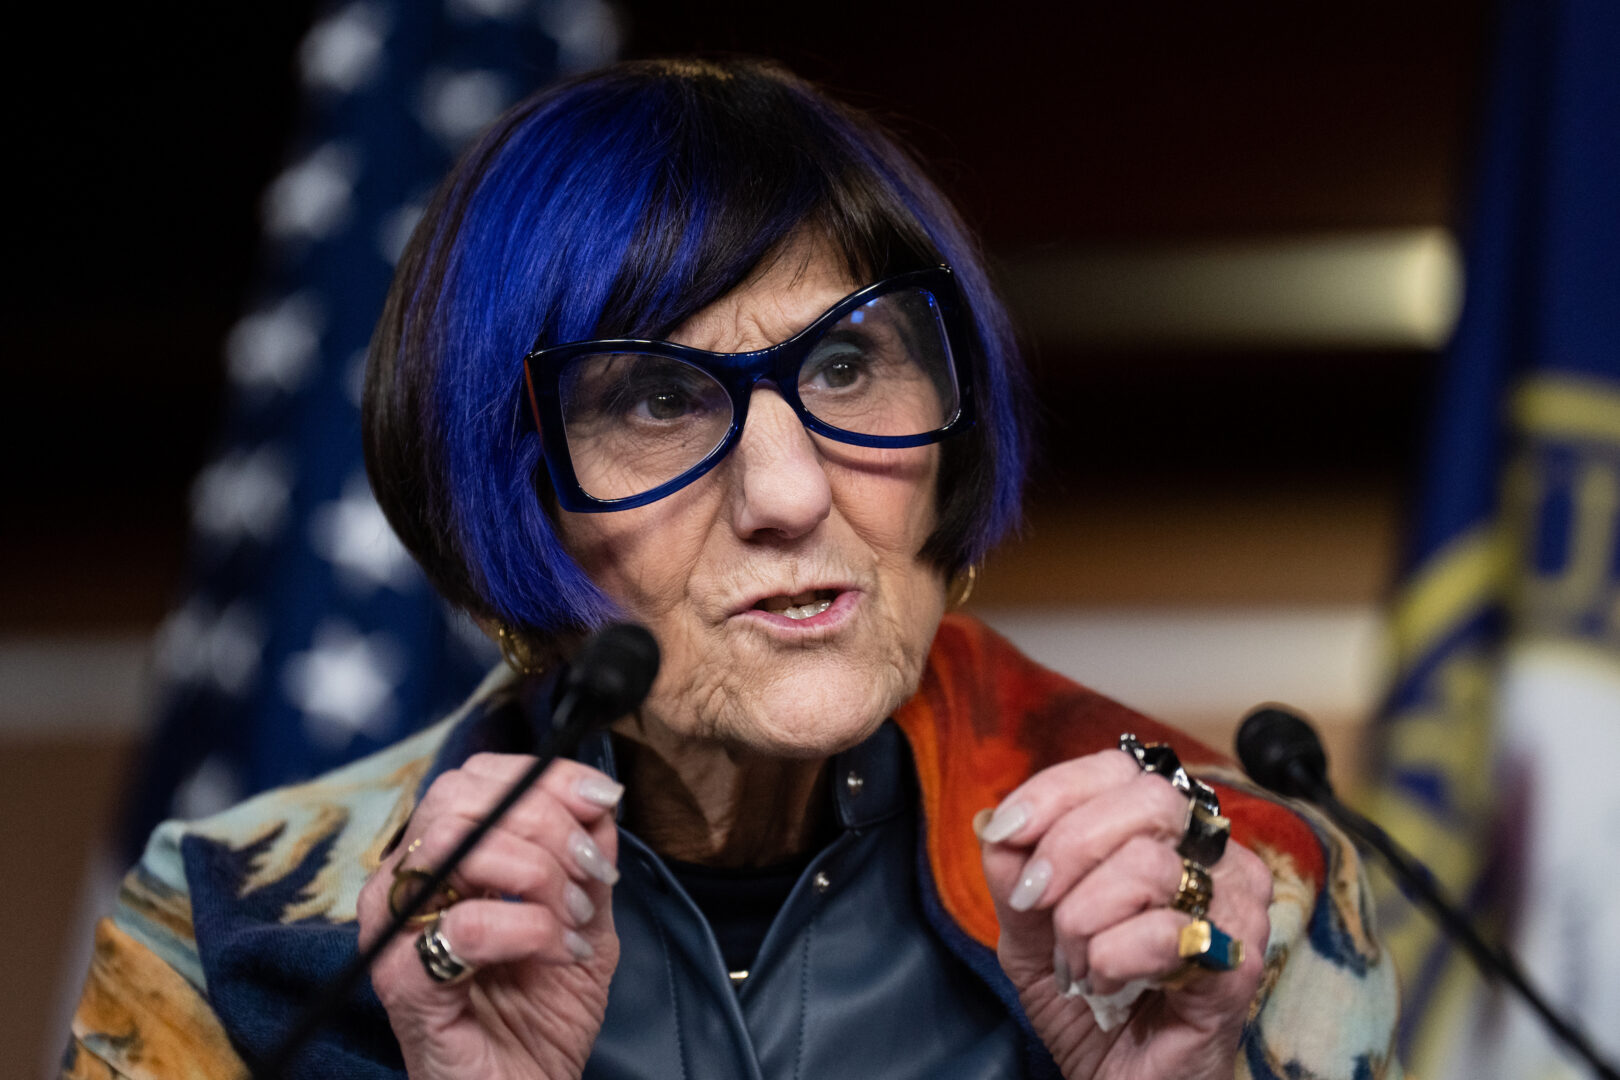 The proposal is an “important step” in safeguarding national security, says House Appropriations ranking member Rosa DeLauro.